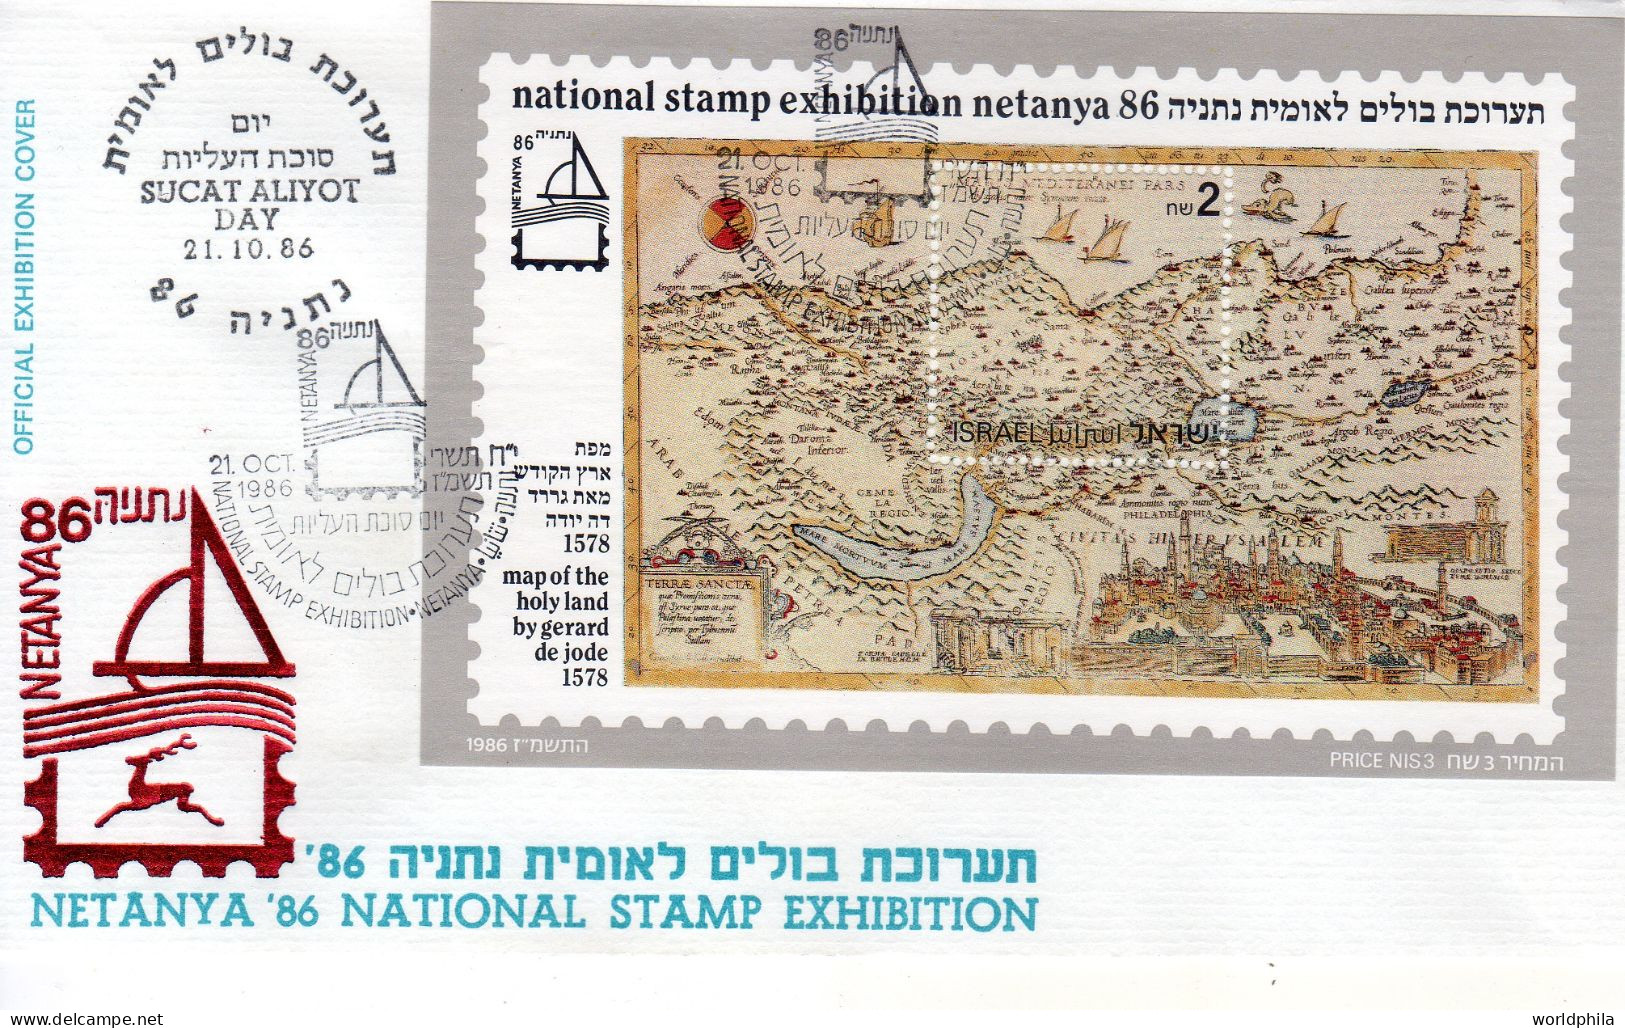 ISRAEL "Netanya 86" National Stamp Exhibition Cacheted Special Cover "Map Of The Holy Land" Souvenir Sheet - Covers & Documents